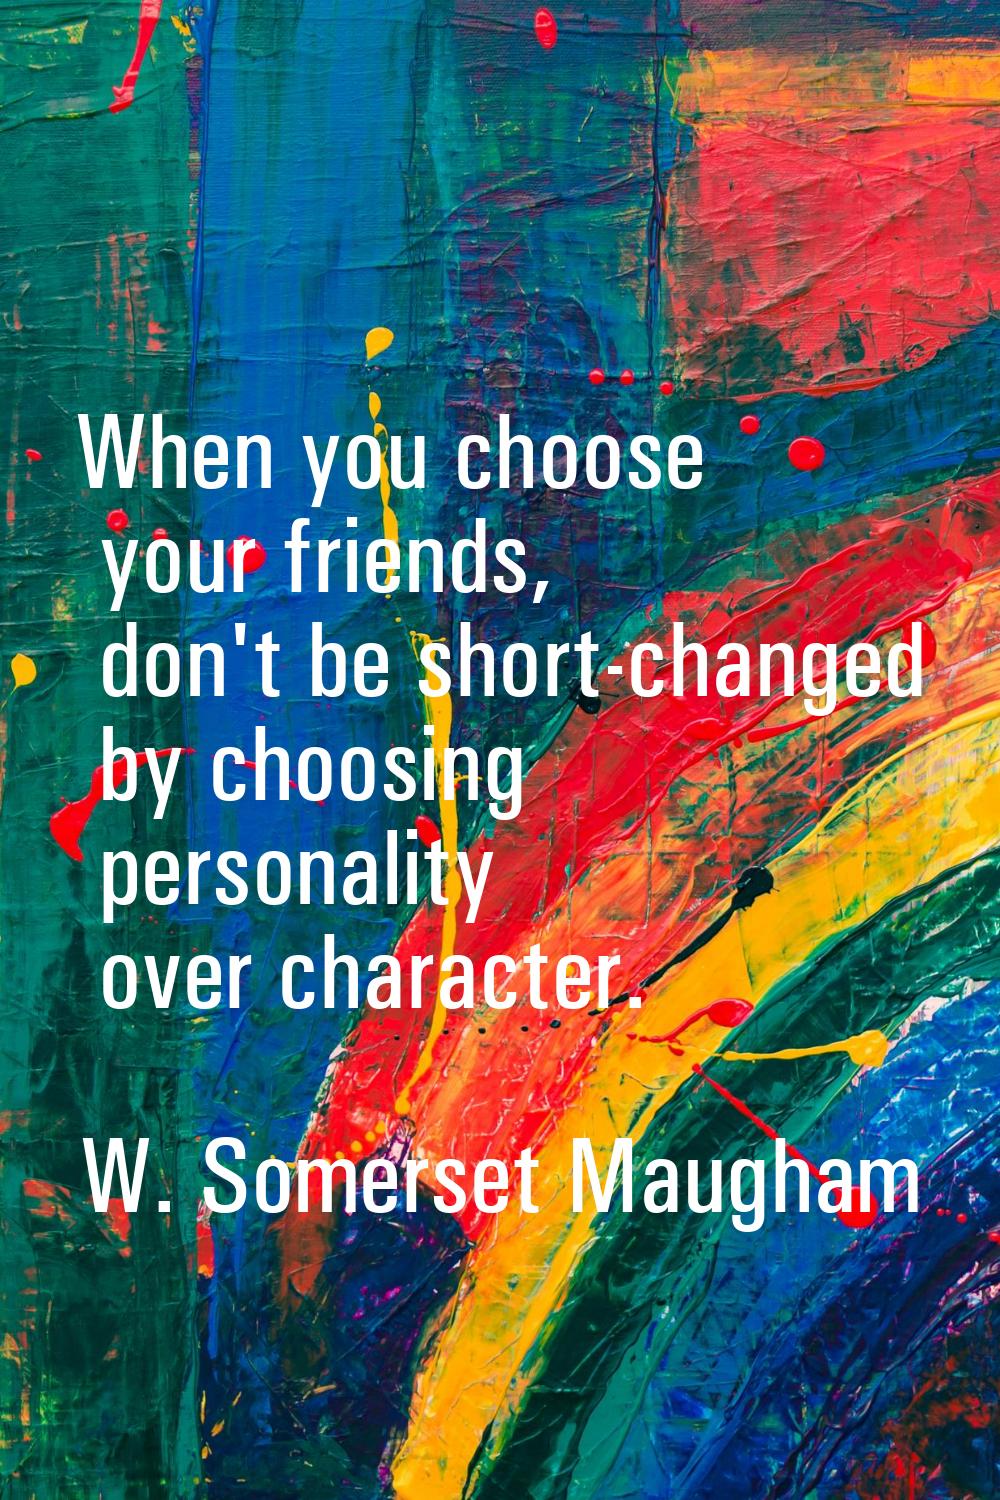 When you choose your friends, don't be short-changed by choosing personality over character.